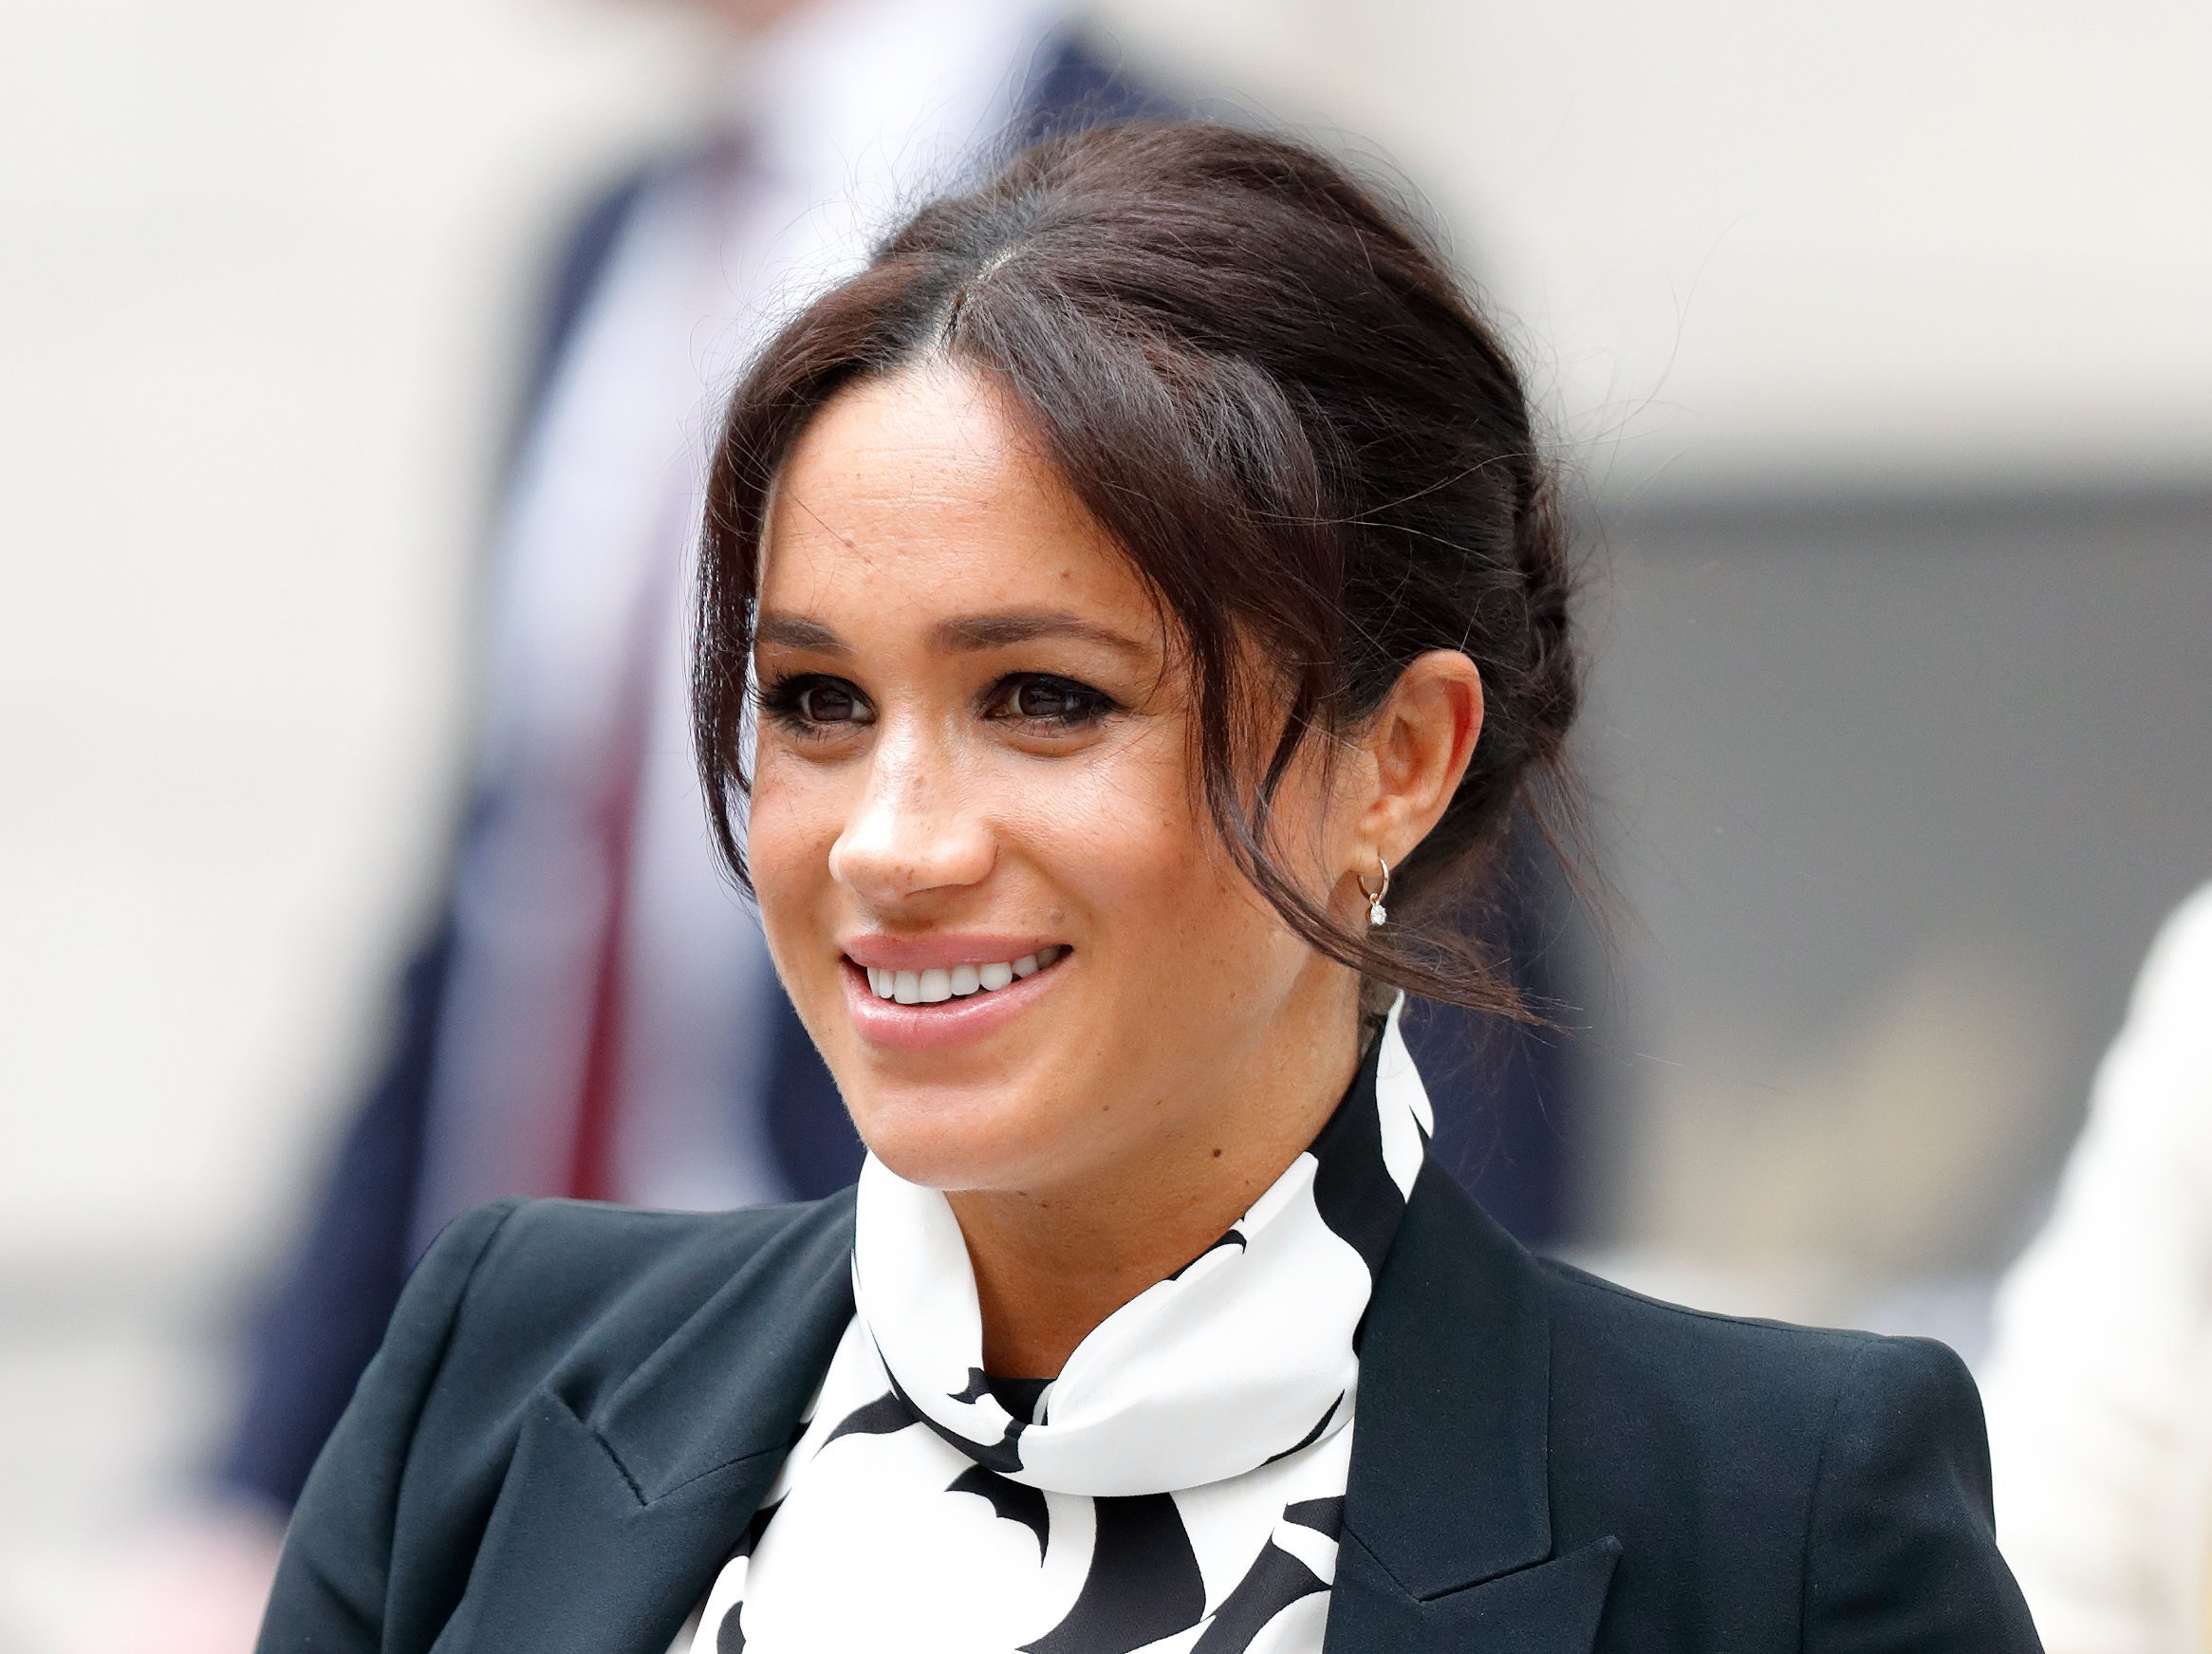 Meghan Markle at King's College London on March 8, 2019, in London, England. | Source: Getty Images.